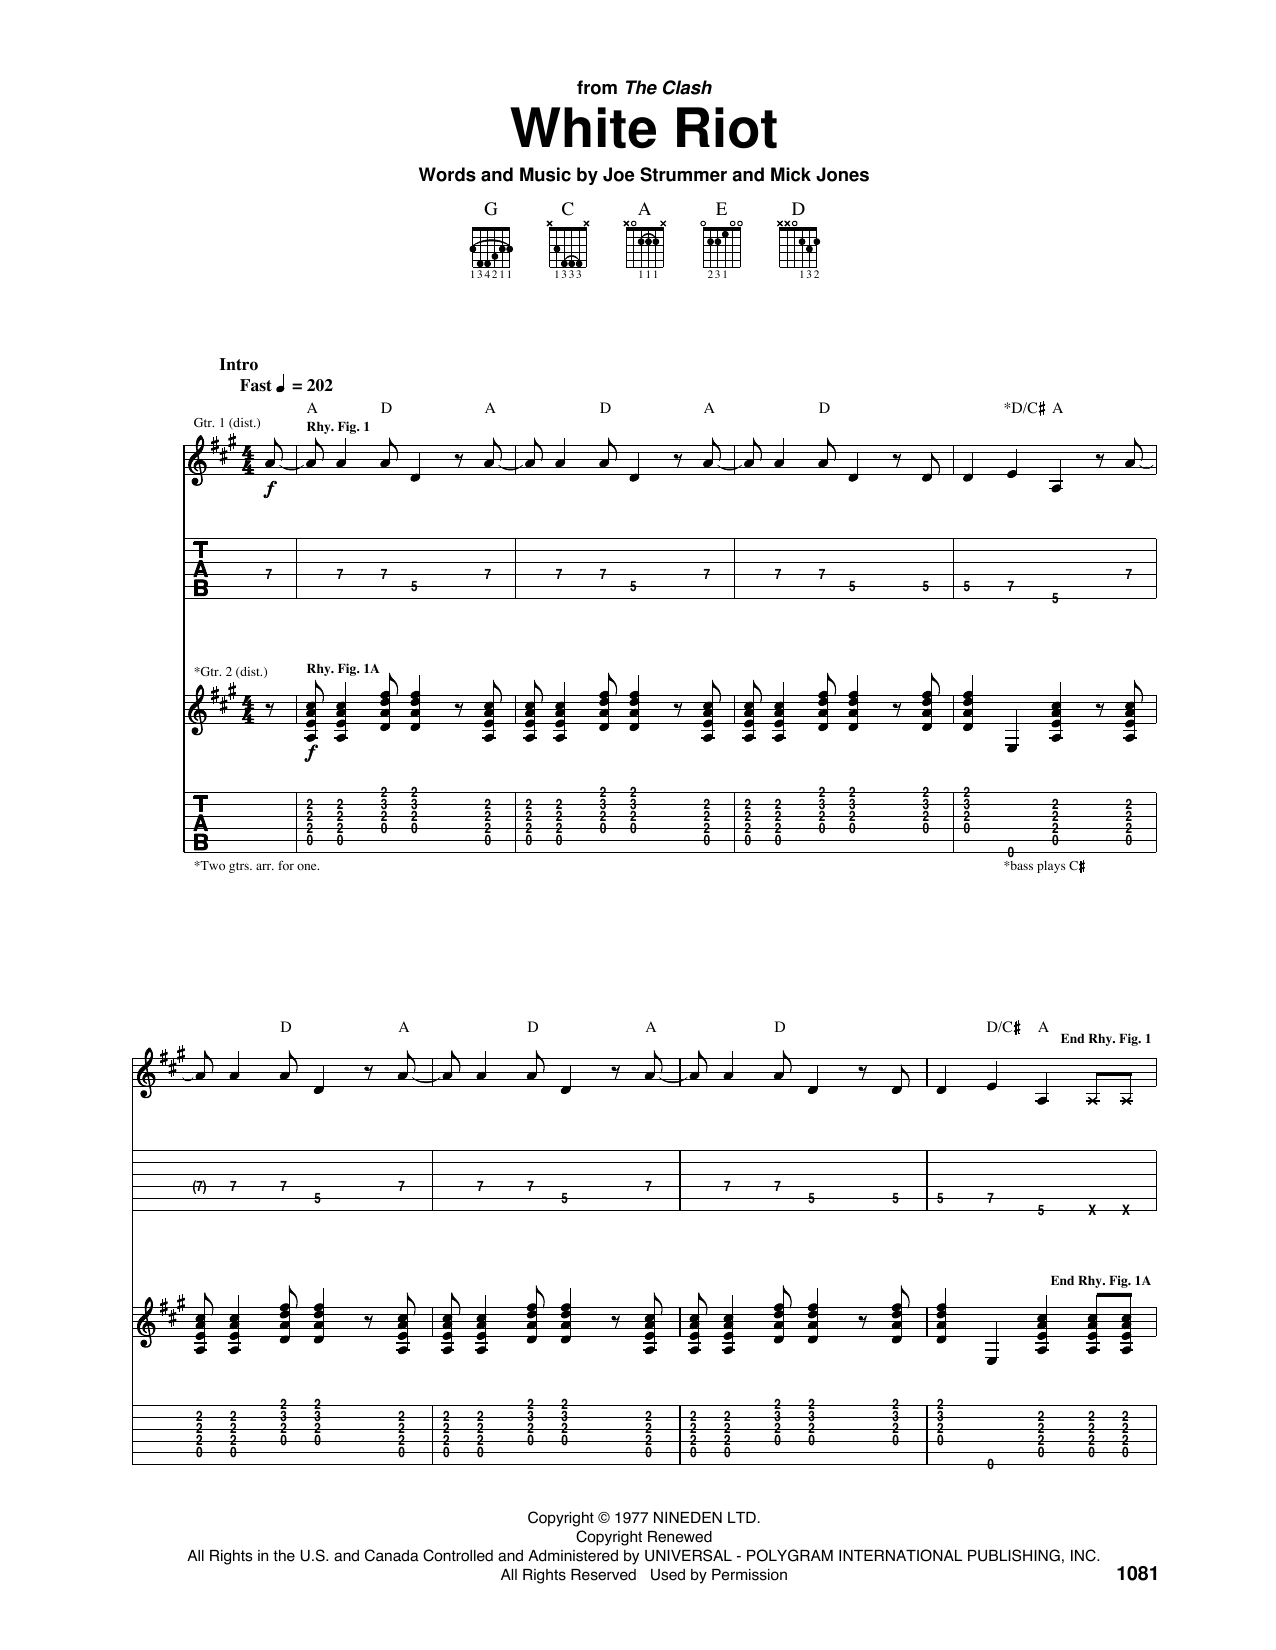 Download The Clash White Riot Sheet Music